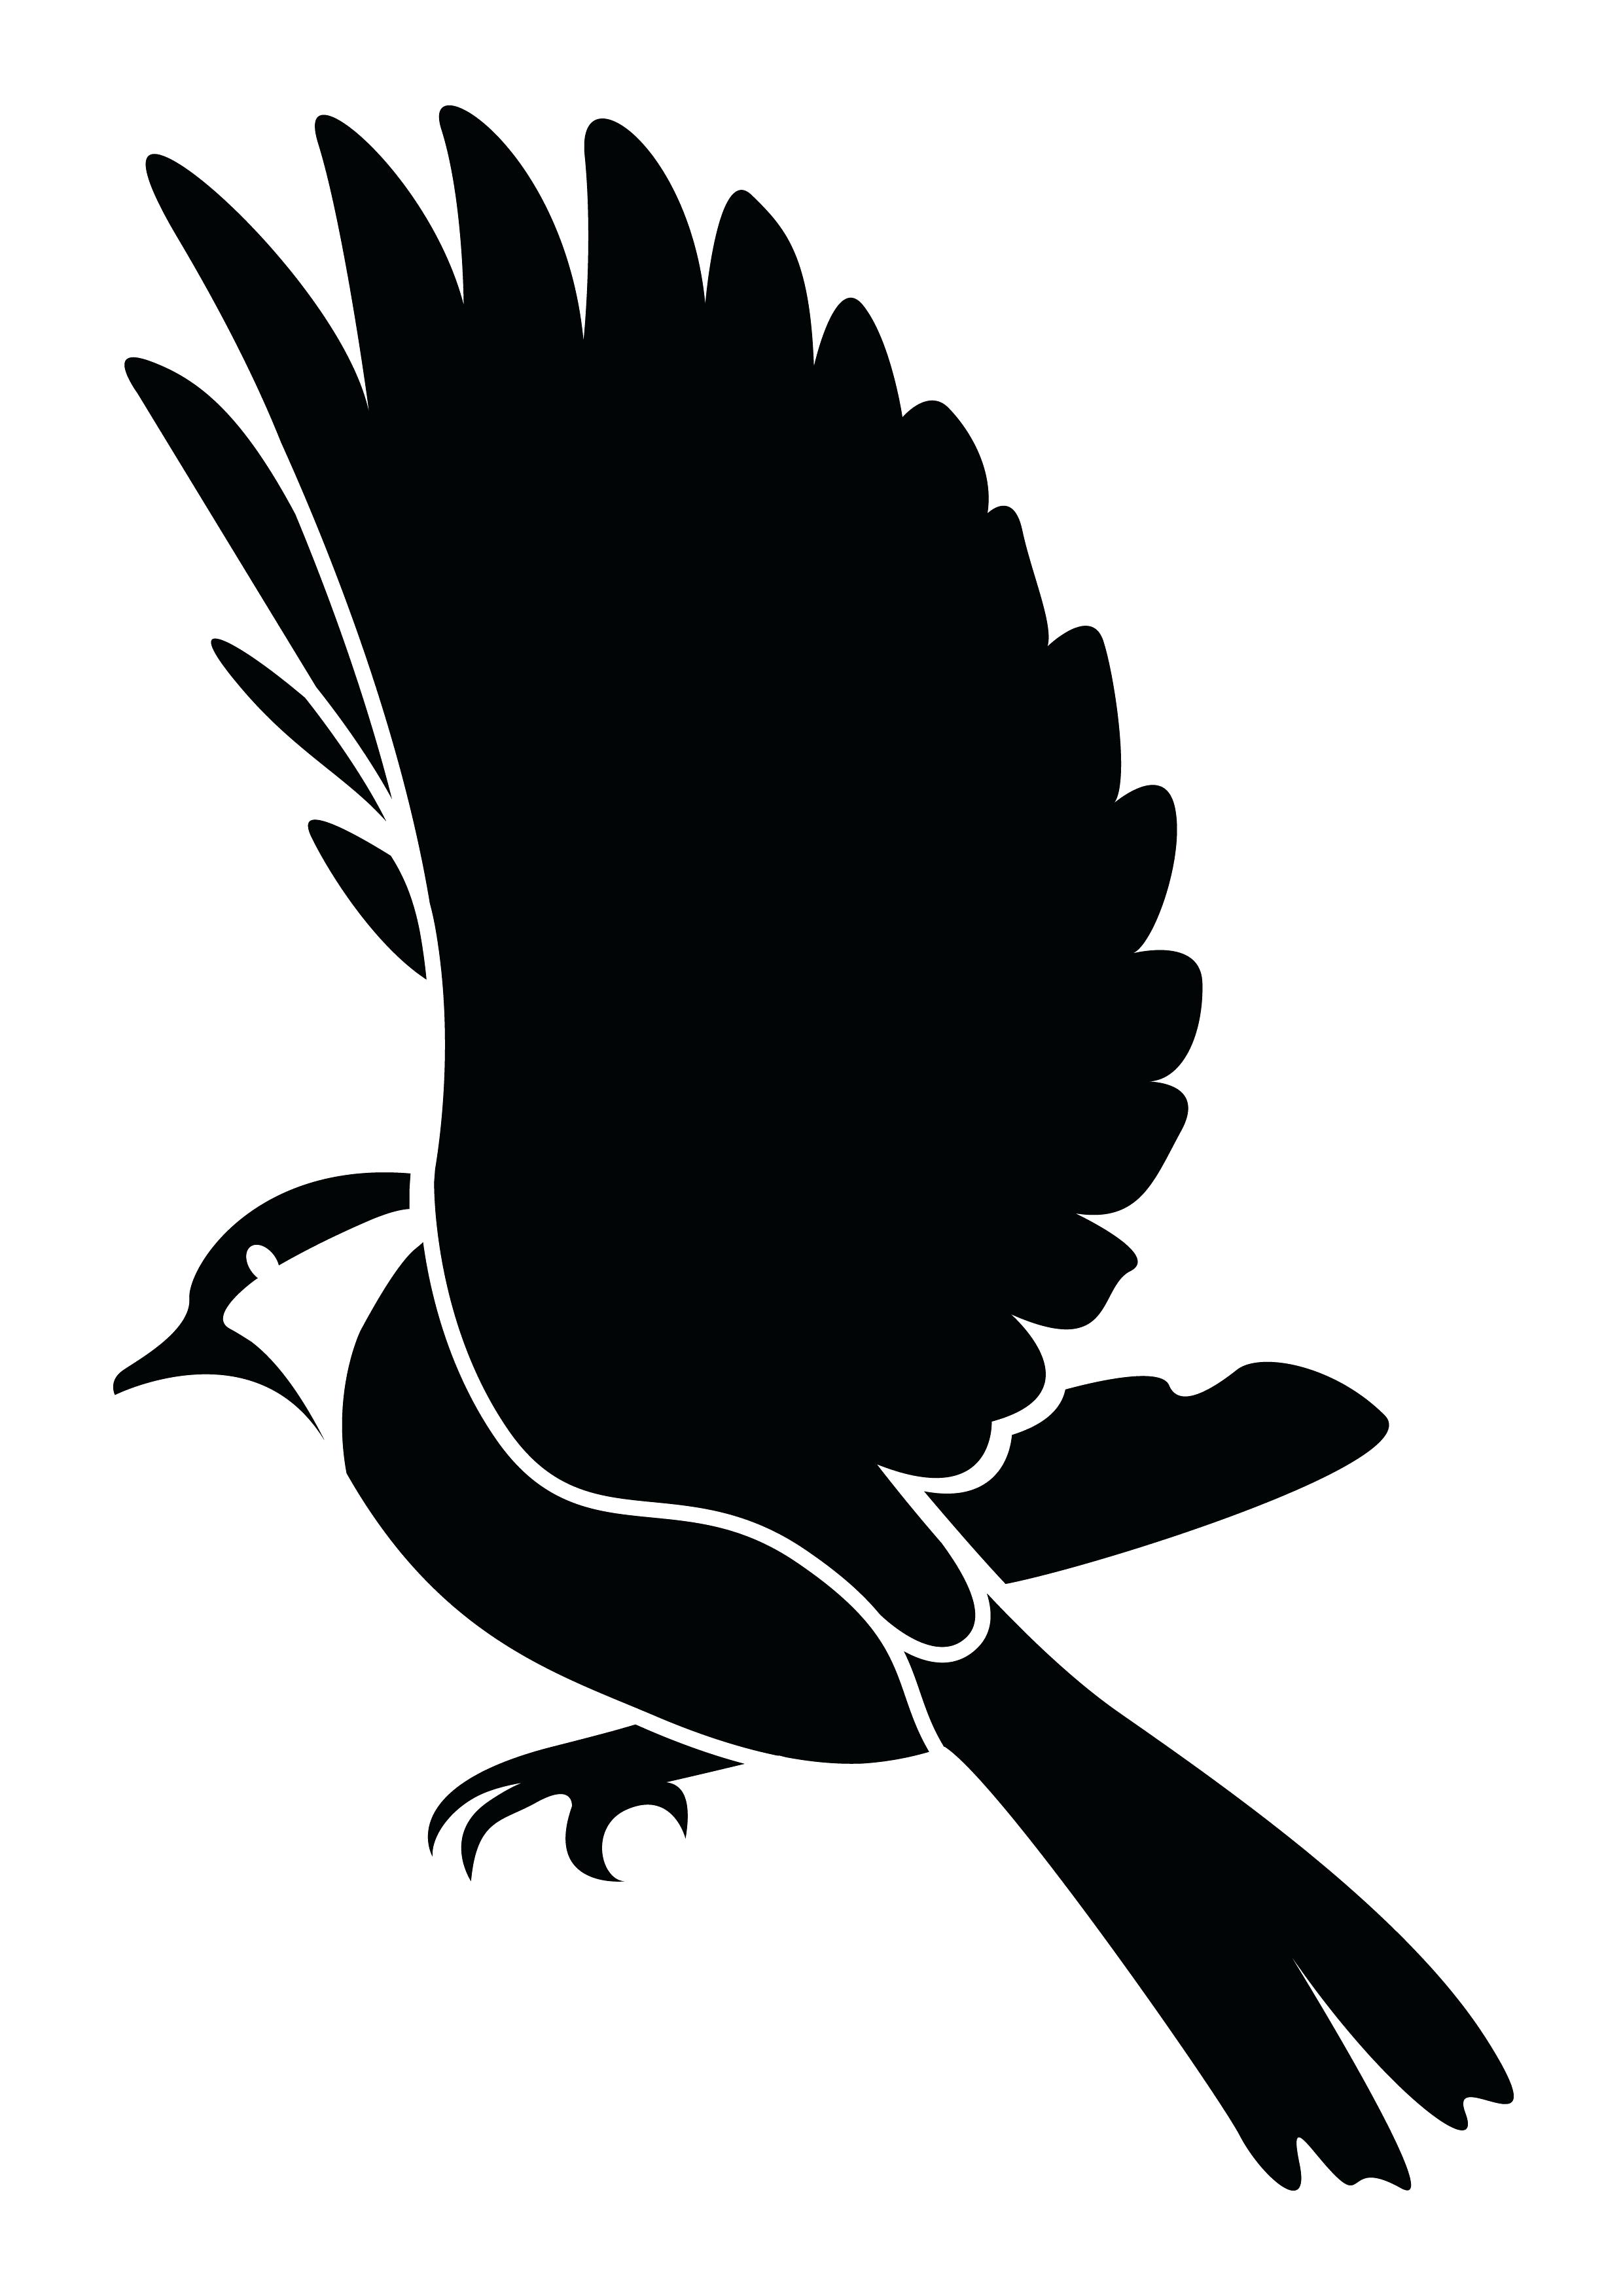 Flying Bird Silhouette Stencils at GetDrawings Free download